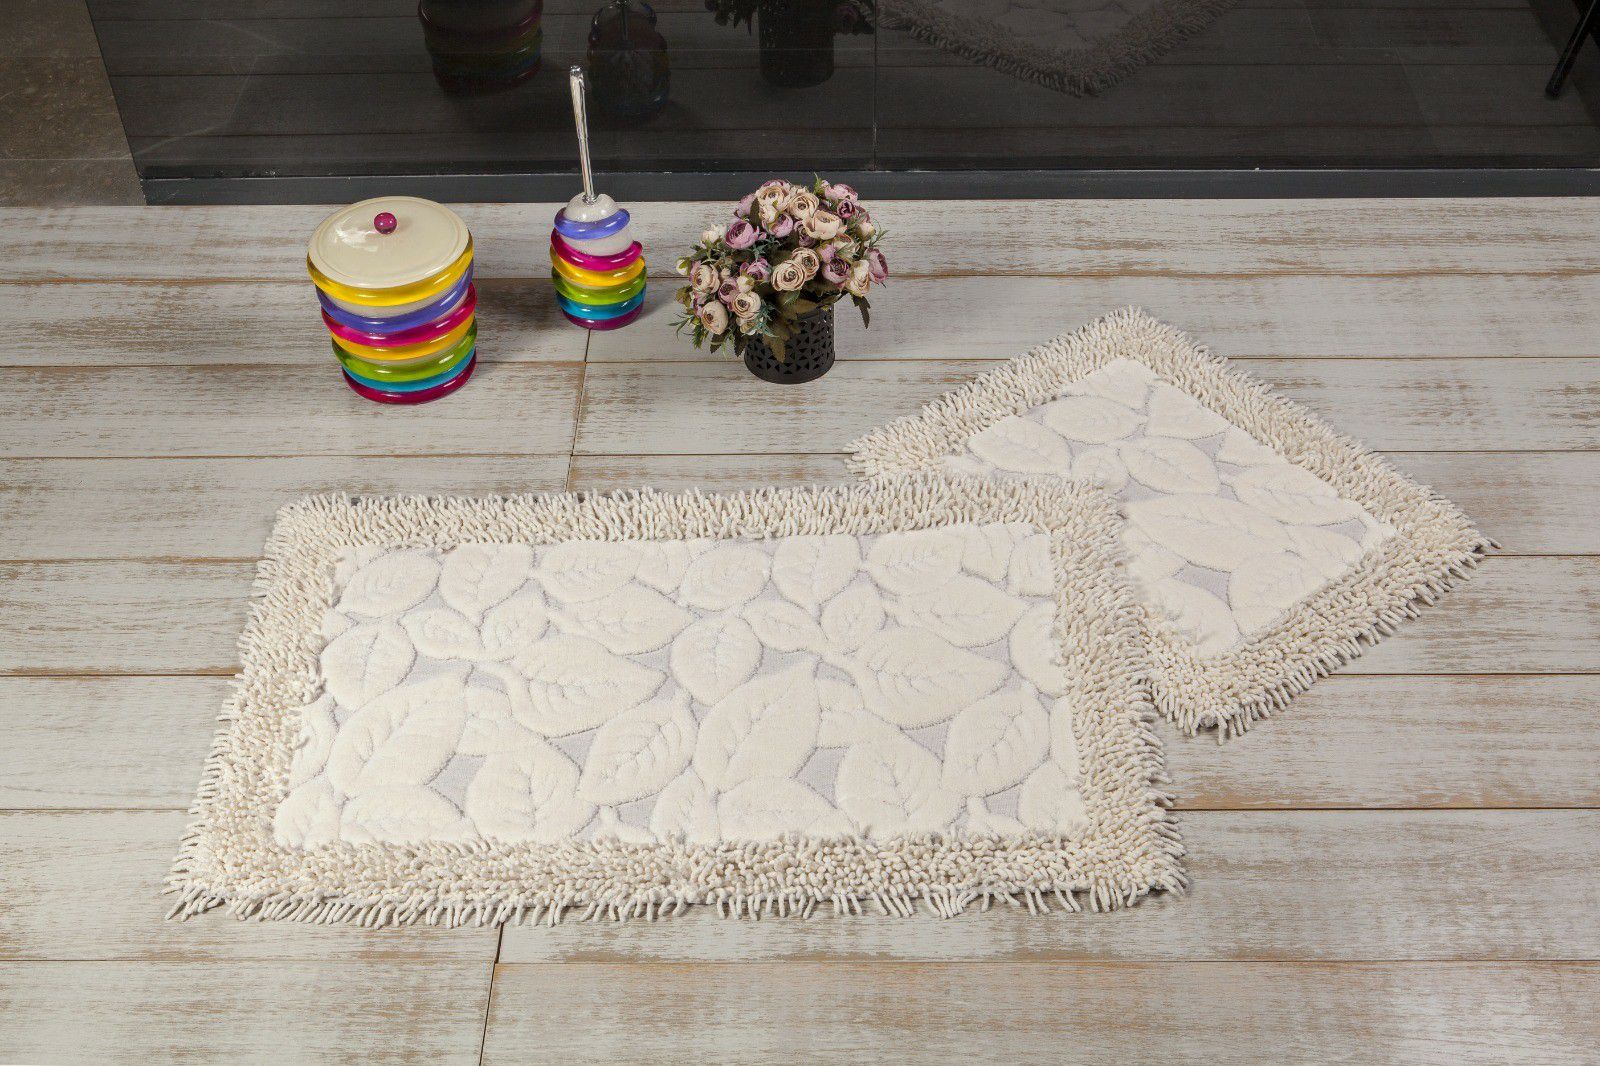 Bathroom, kitchen rugs(mats). Cotton, organic. Washable and very soft.